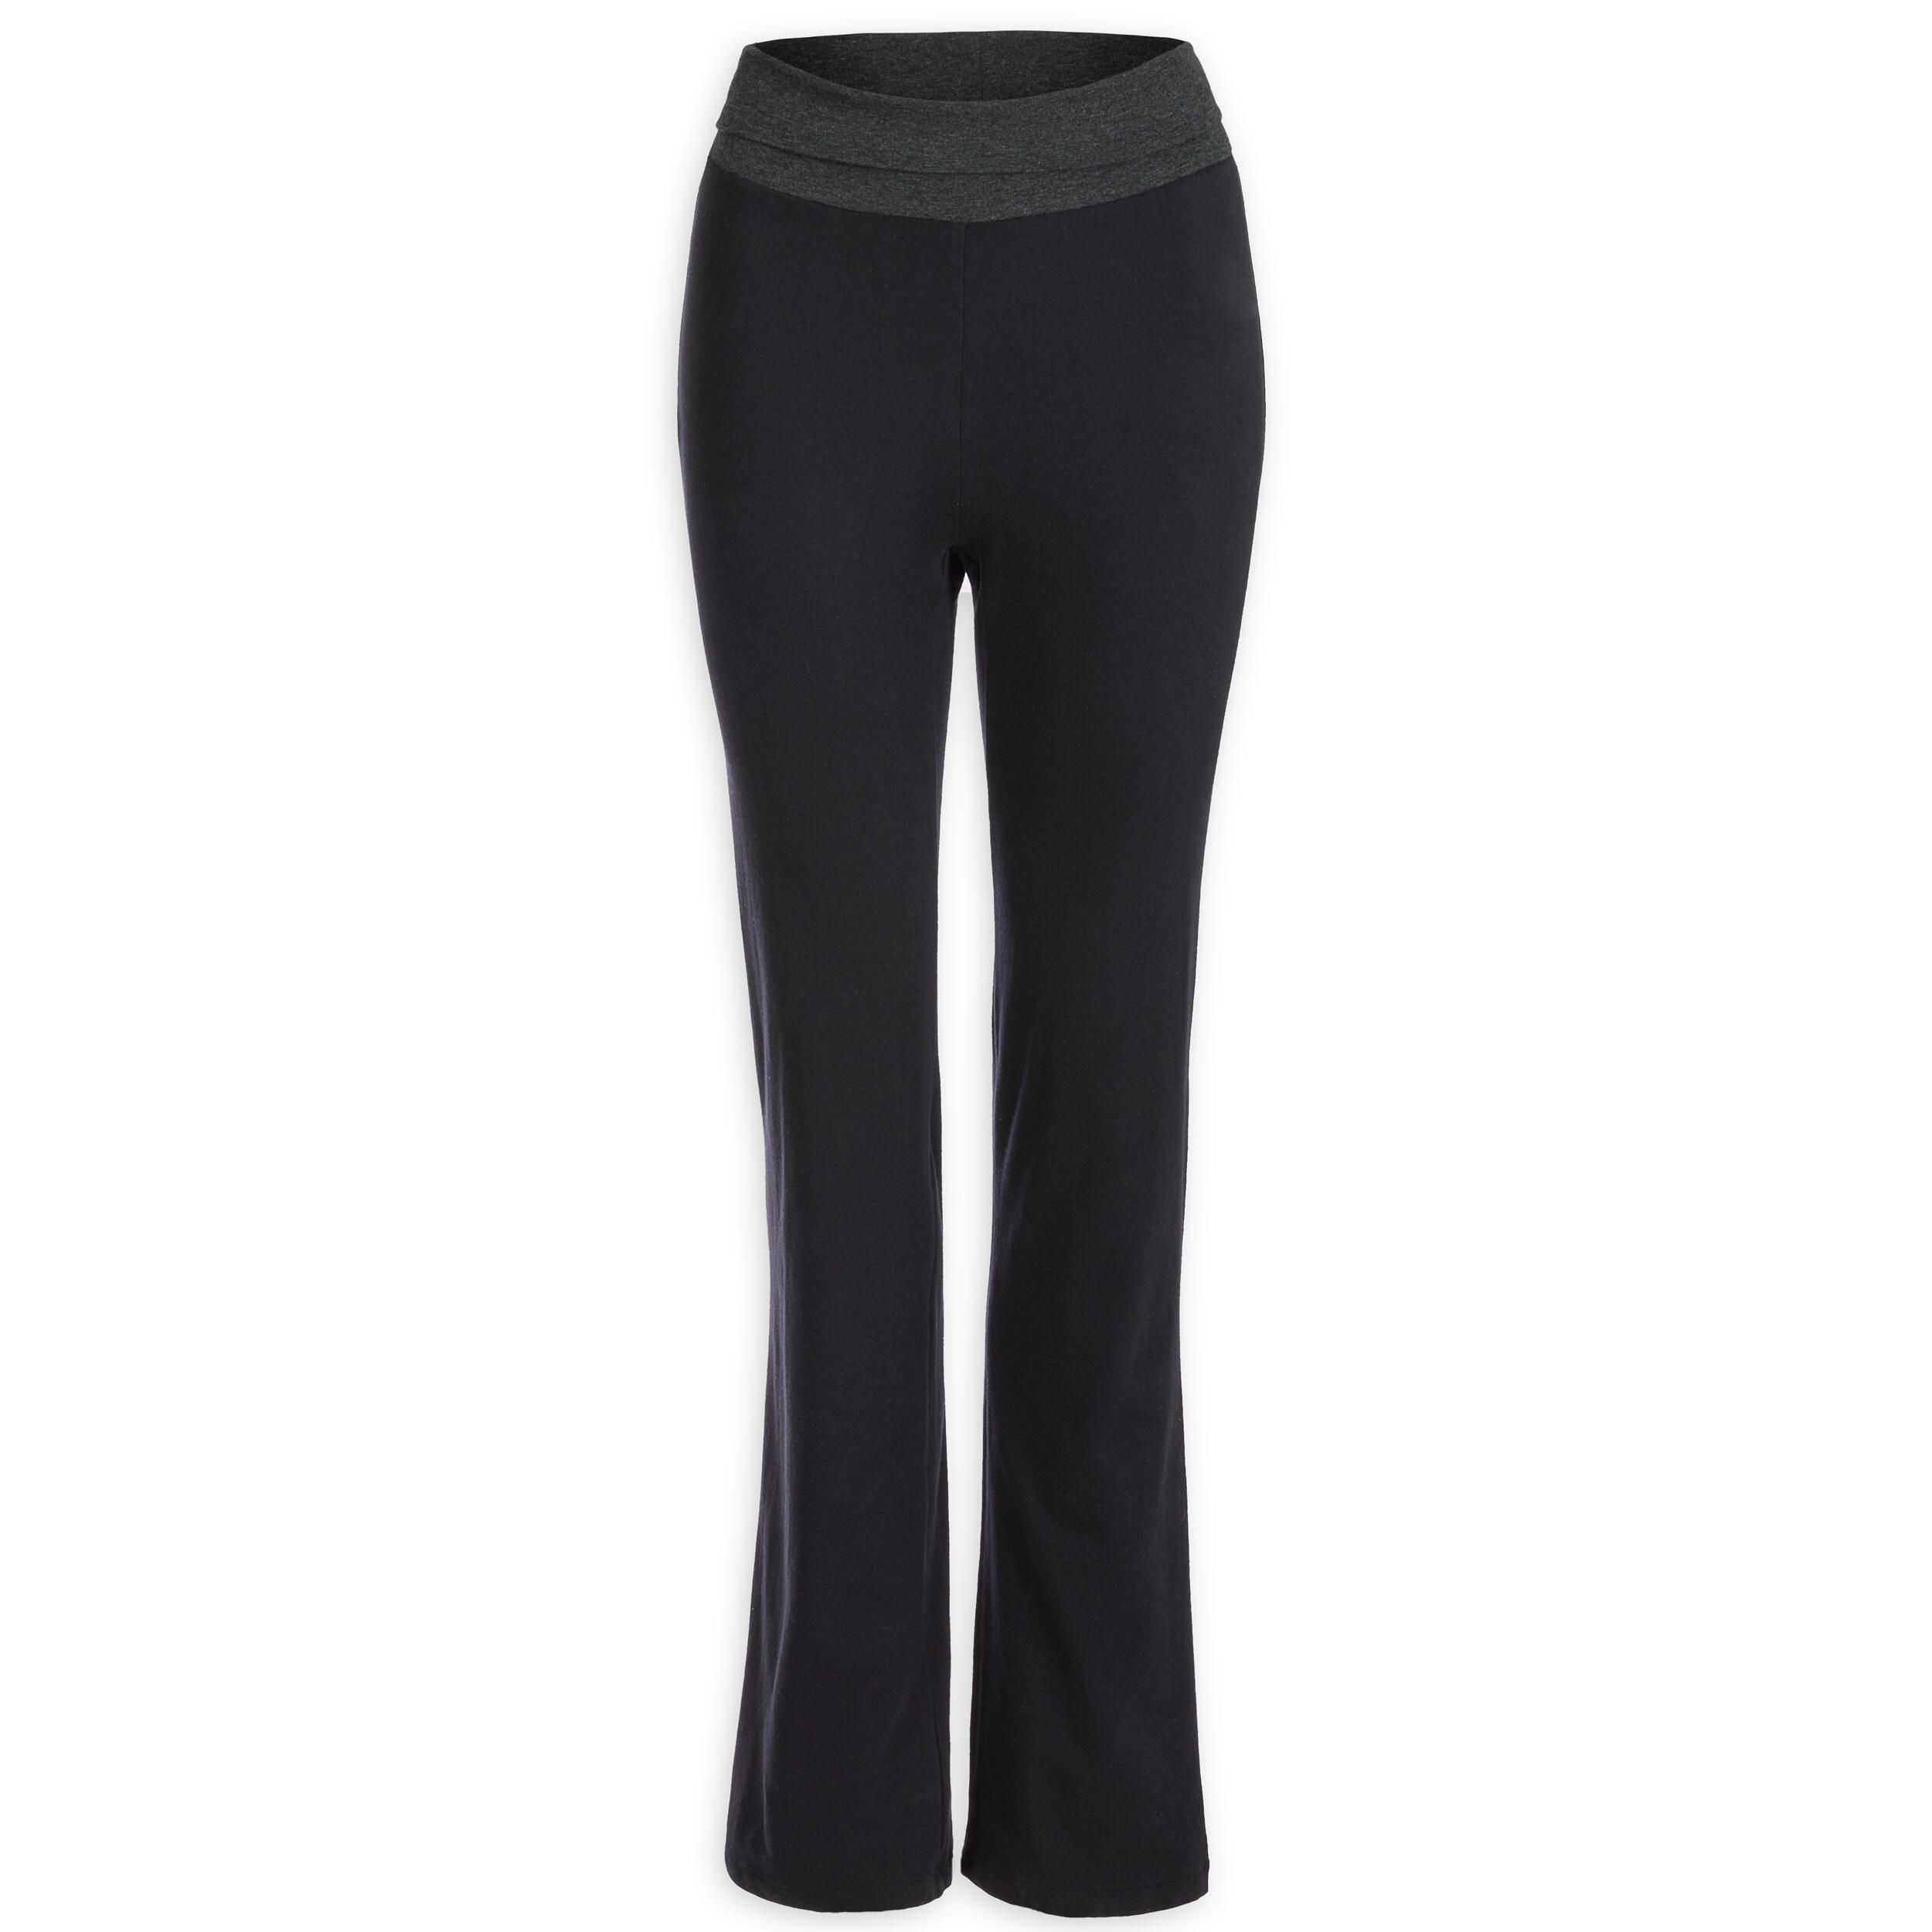 Women's Sports Trousers, Sports Pants for Ladies